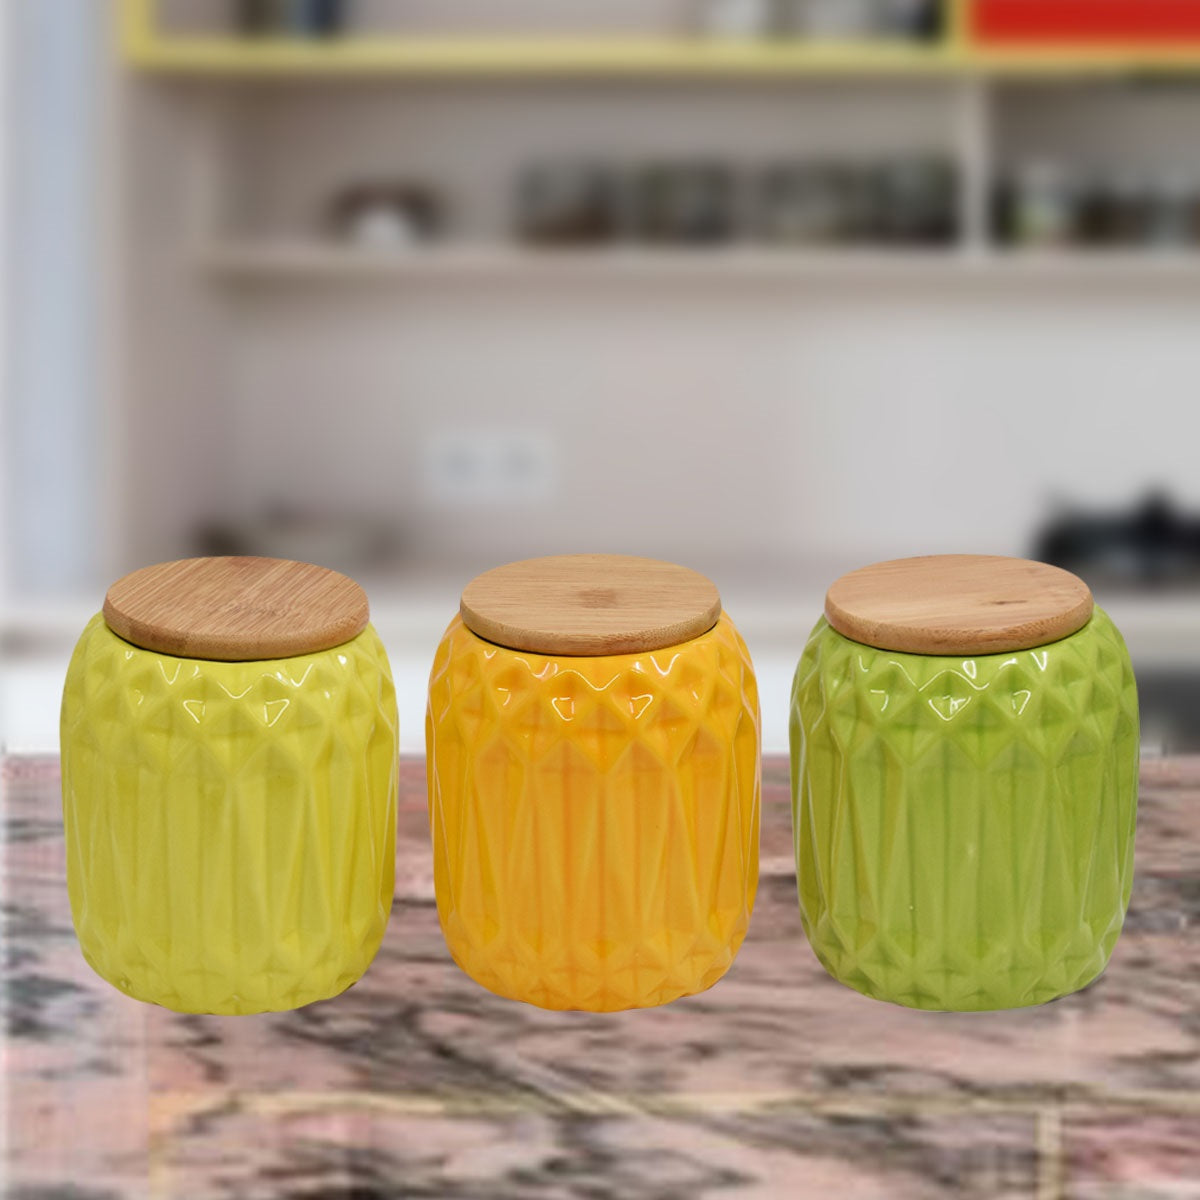 Kookee Ceramic Canister Jars & Containers Set for Kitchen Food Storage, Used for Store Uncooked Rice, Cereal, Pasta, Coffee, Tea, Flour, Sugar (Pack of 3) (GS16-11B)